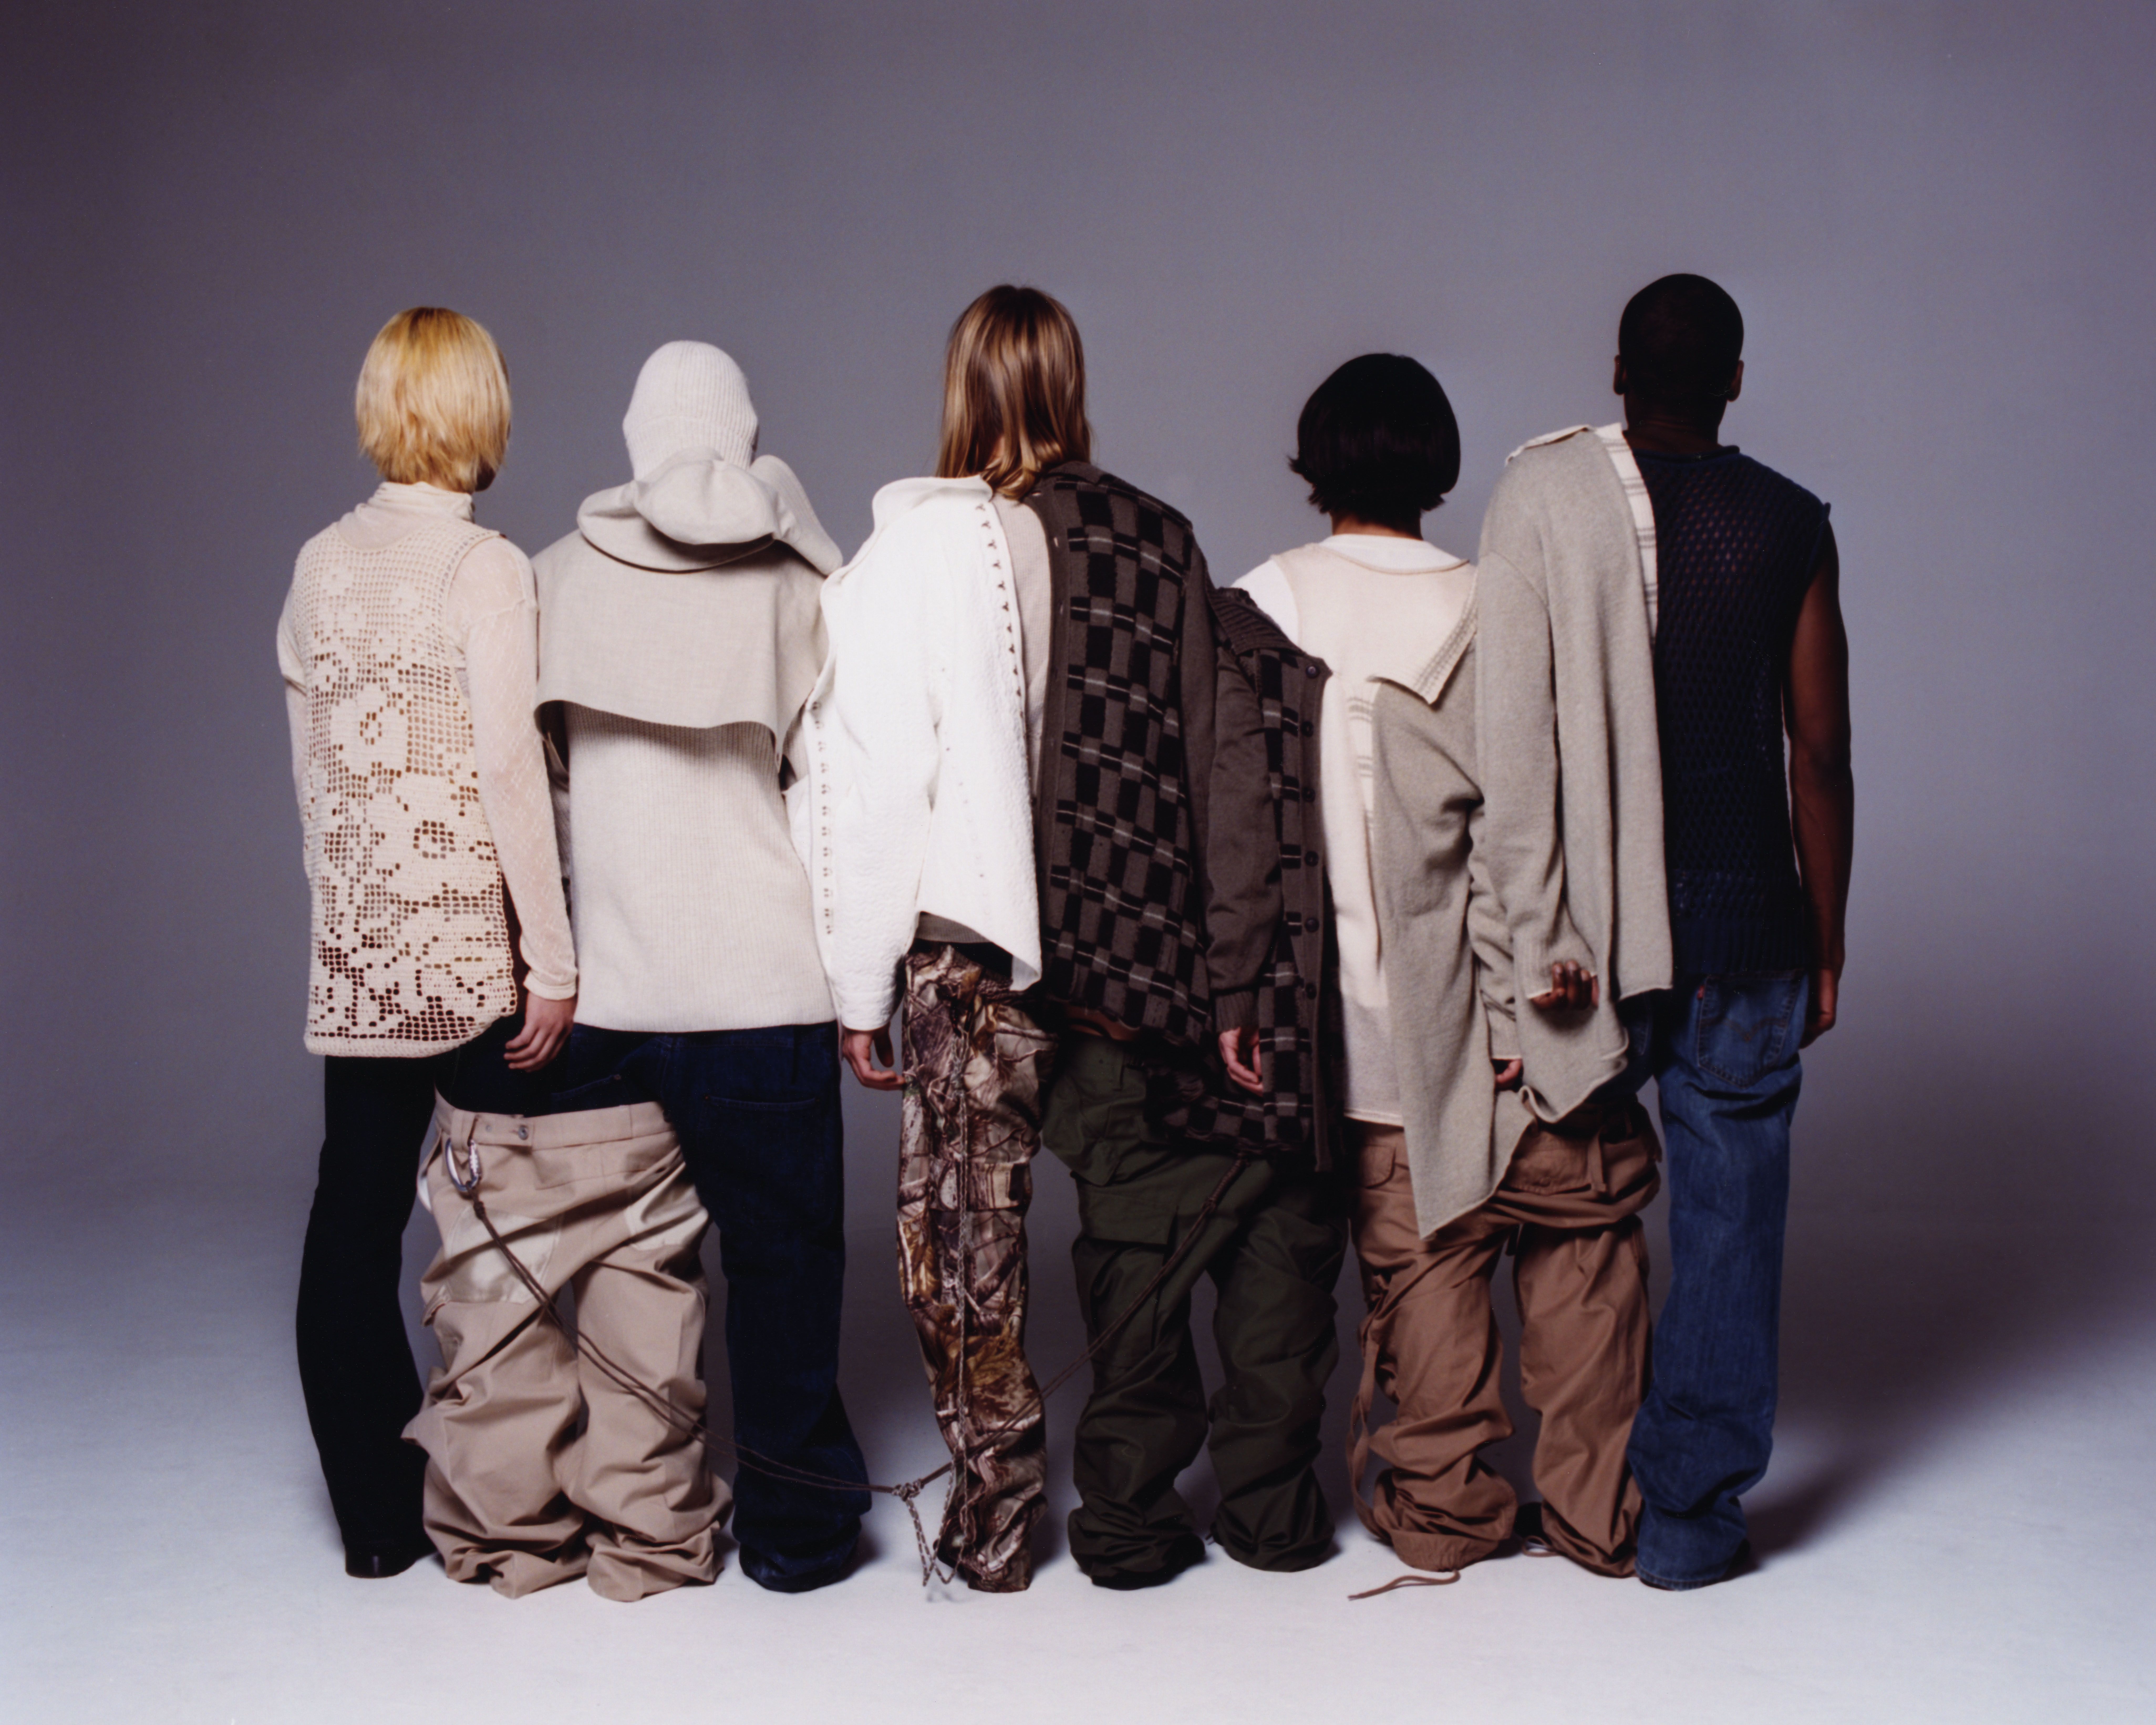 5 models with their backs to the scene, in front of white background